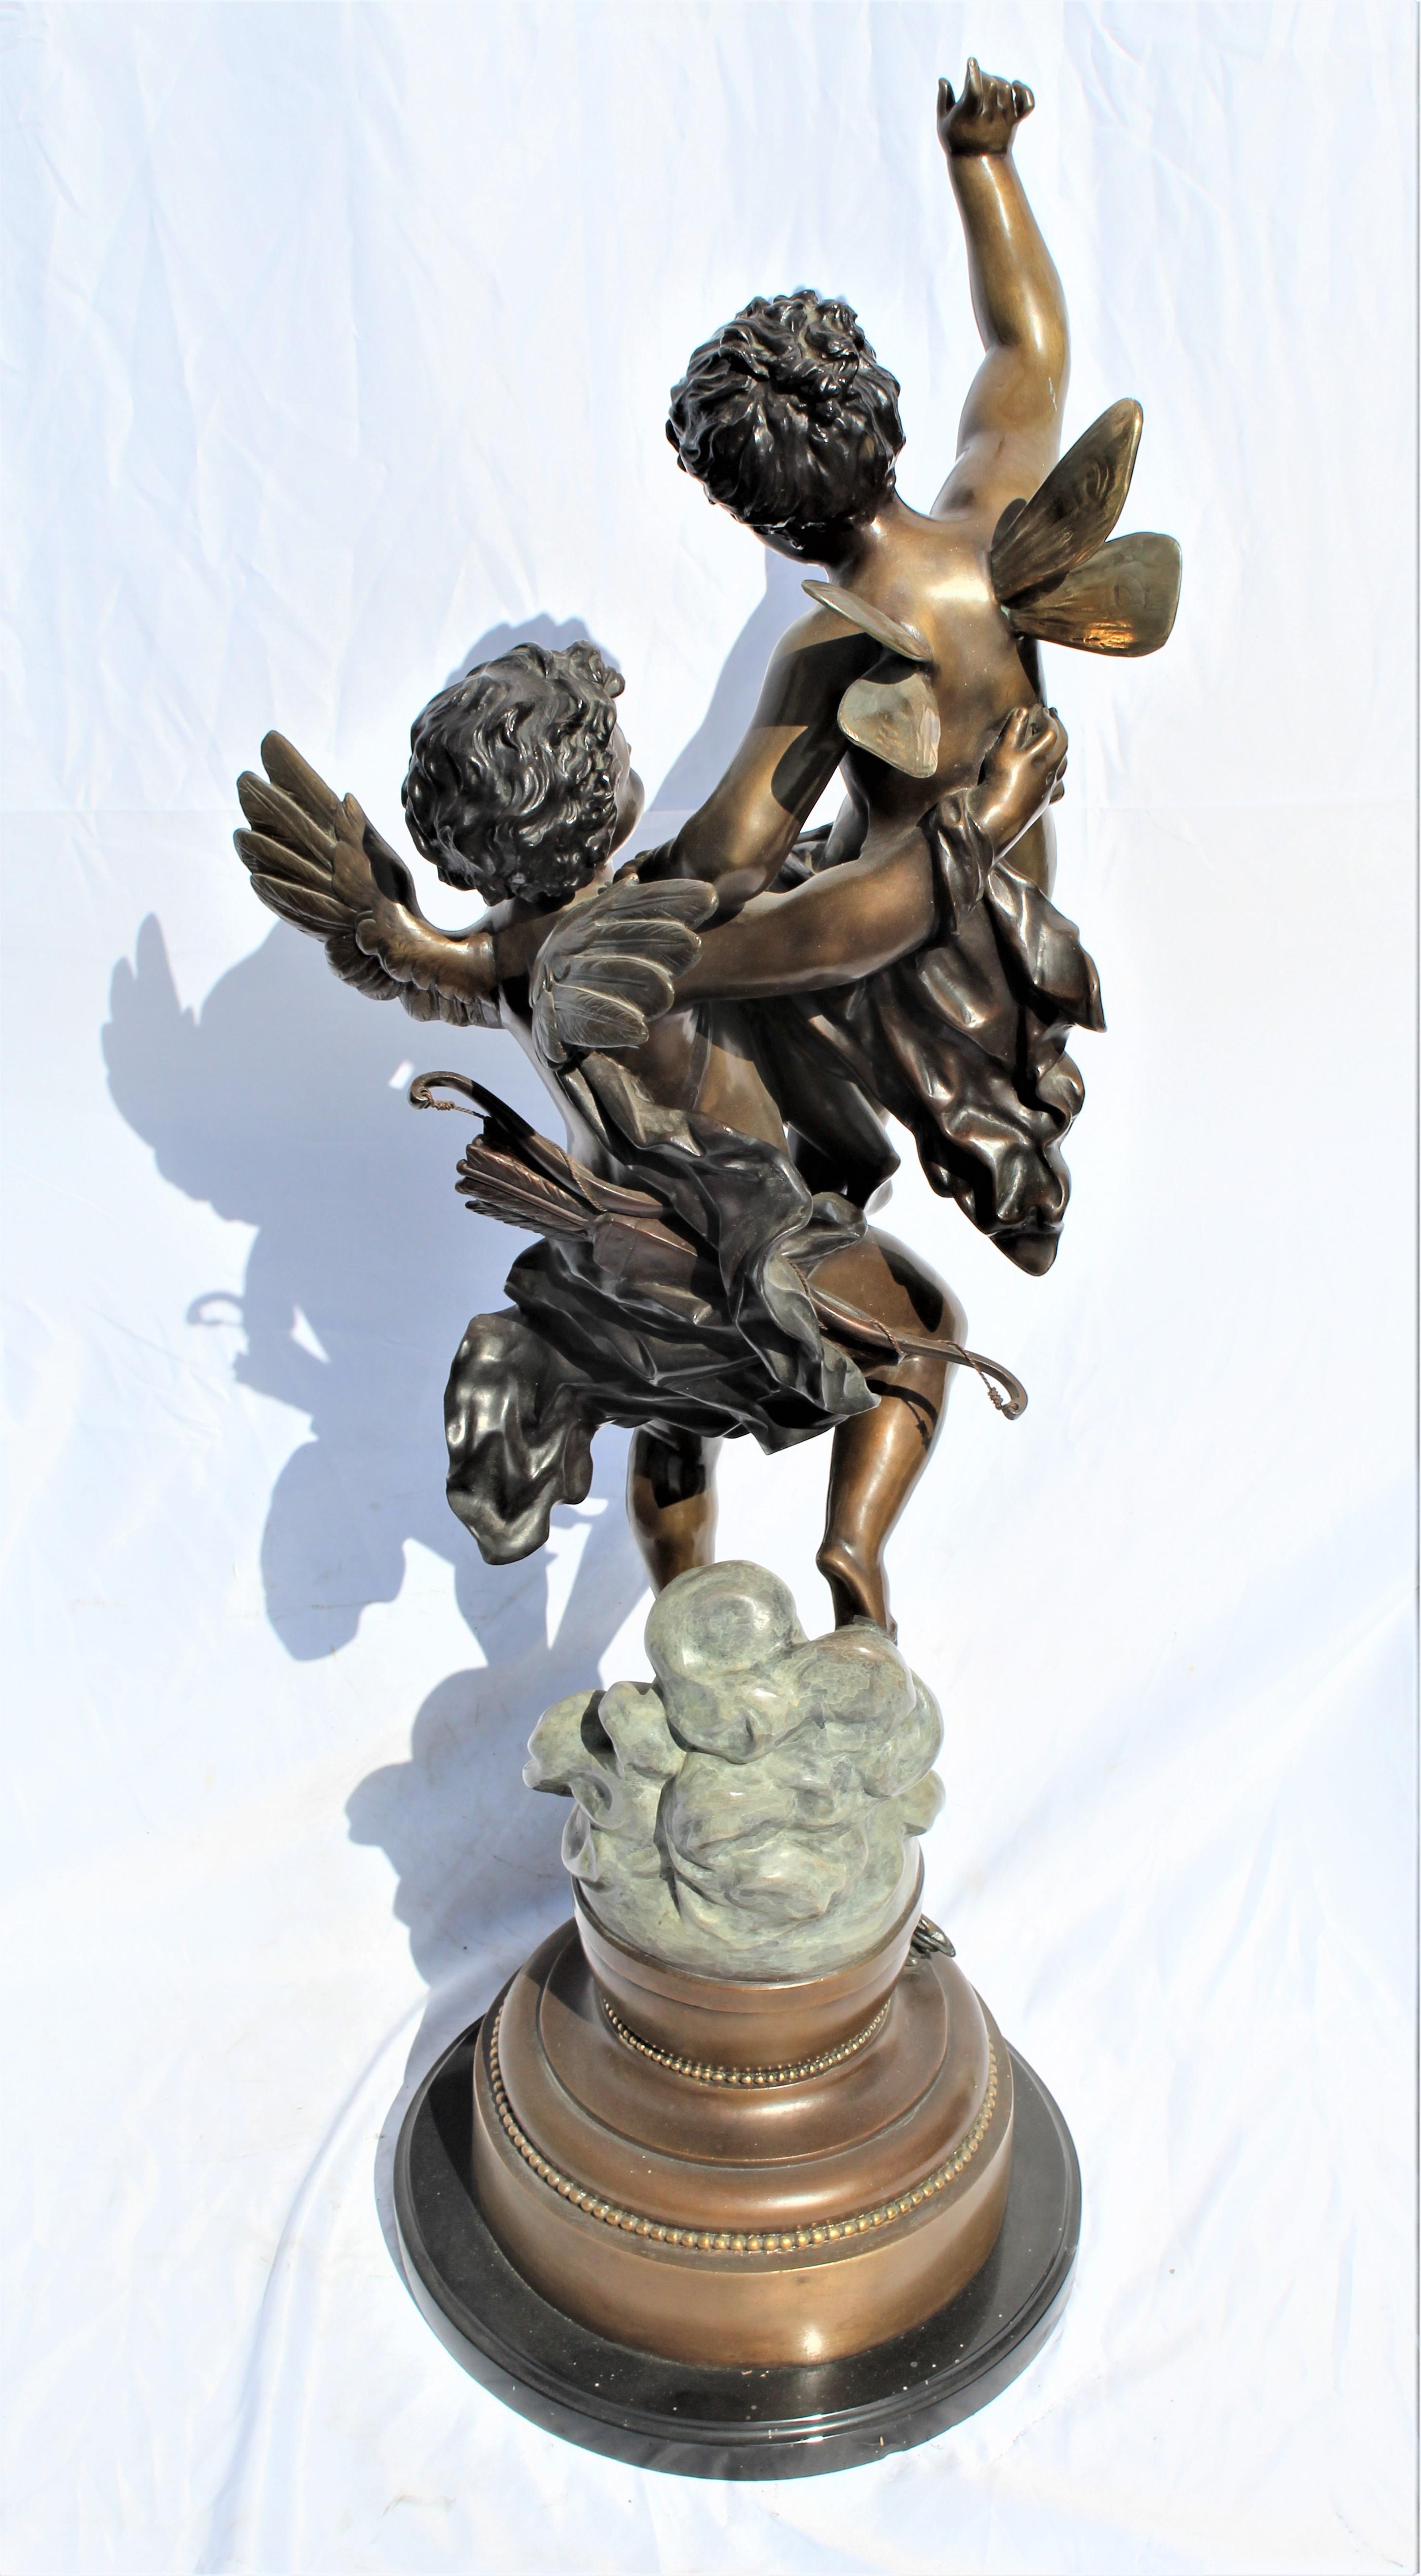 Great looking large bronze sculpture of winged pixy held by a Cherub floating on the clouds. Multi-patinas with fine details. Made from the original. Bears the signature at base. The title is the Triumphator.